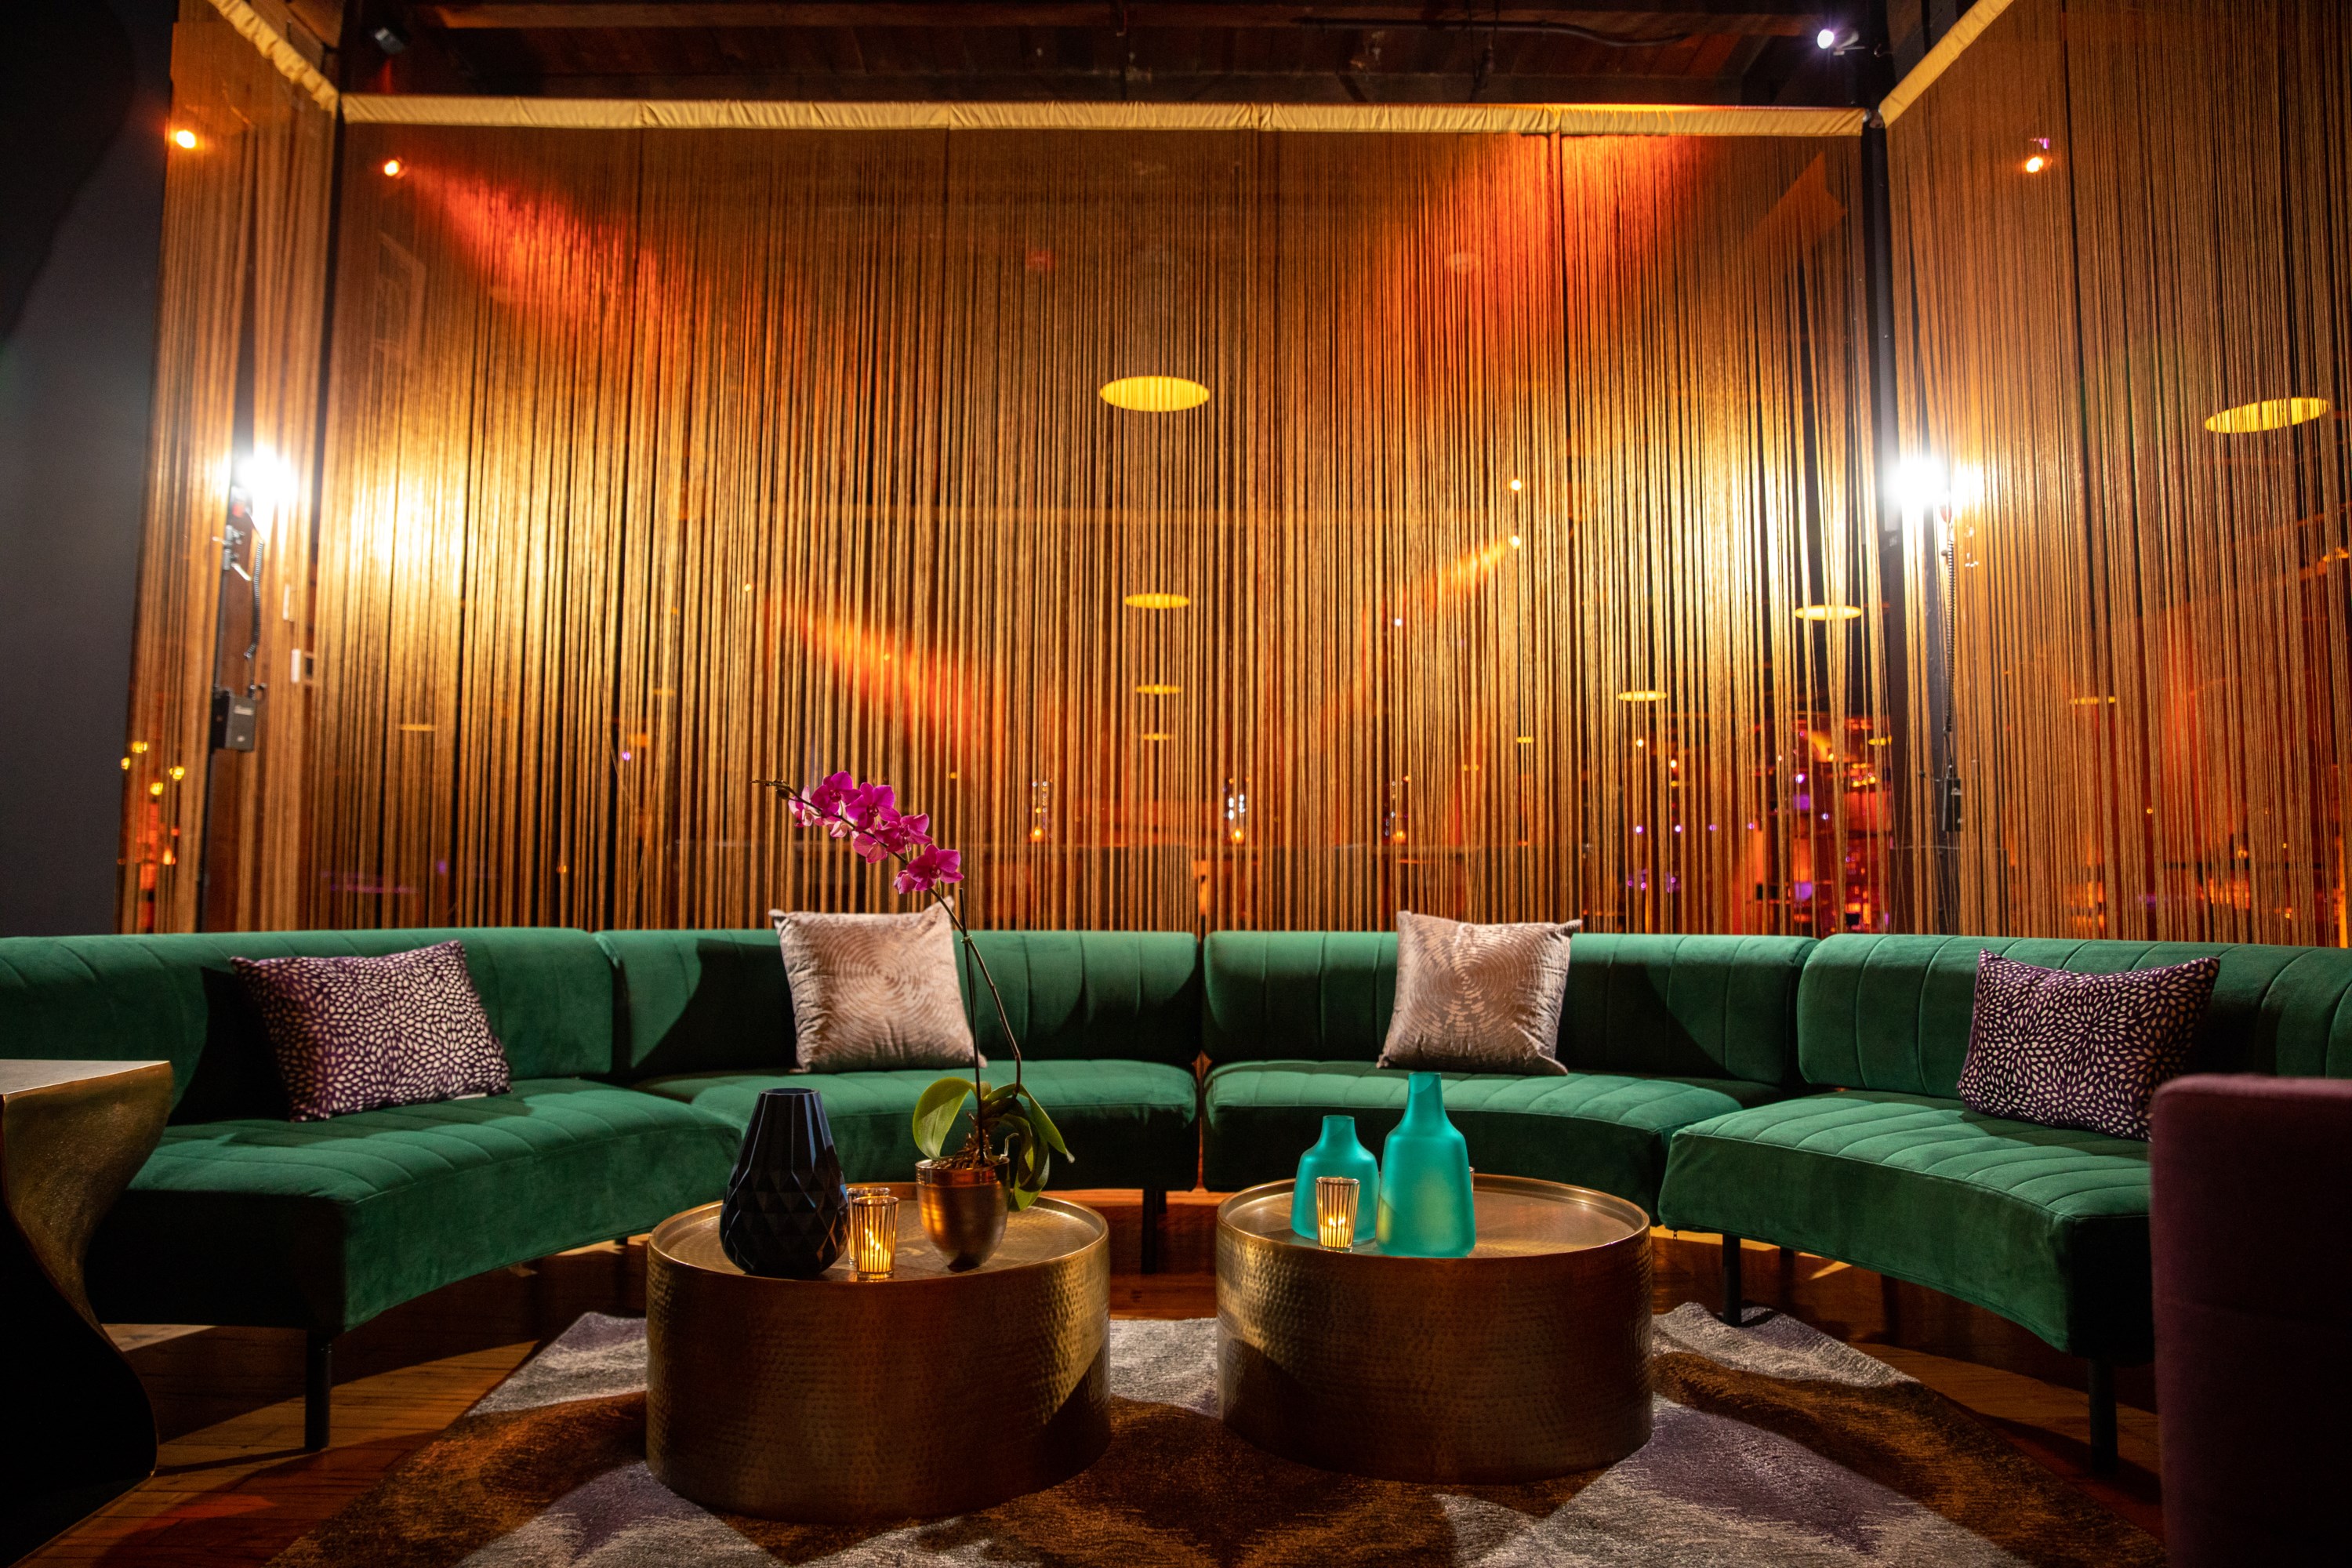 Lounge Event at Heirloom with Green Velvet Couches